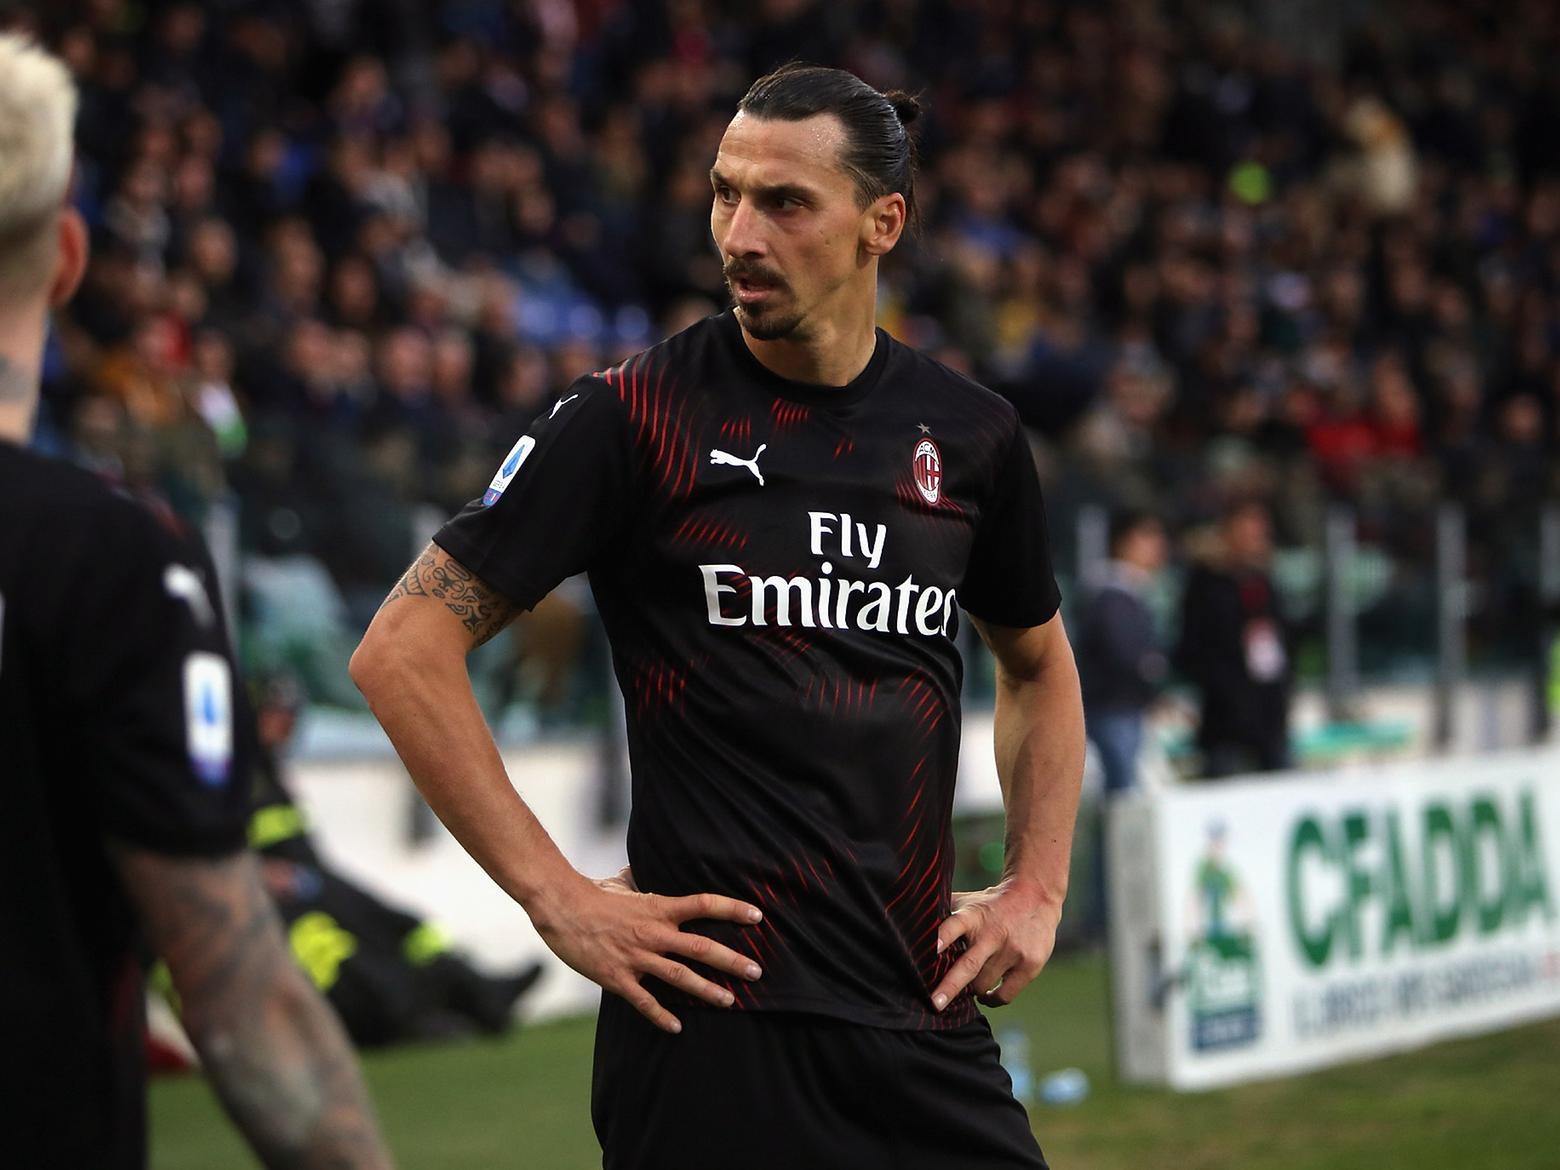 Inter Milan manager Antonio Conte says he tried to sign AC Milan's 38-year-old Swedish striker Zlatan Ibrahimovic, who was at Manchester United at the time, during his time as Chelsea boss. (Evening Standard)